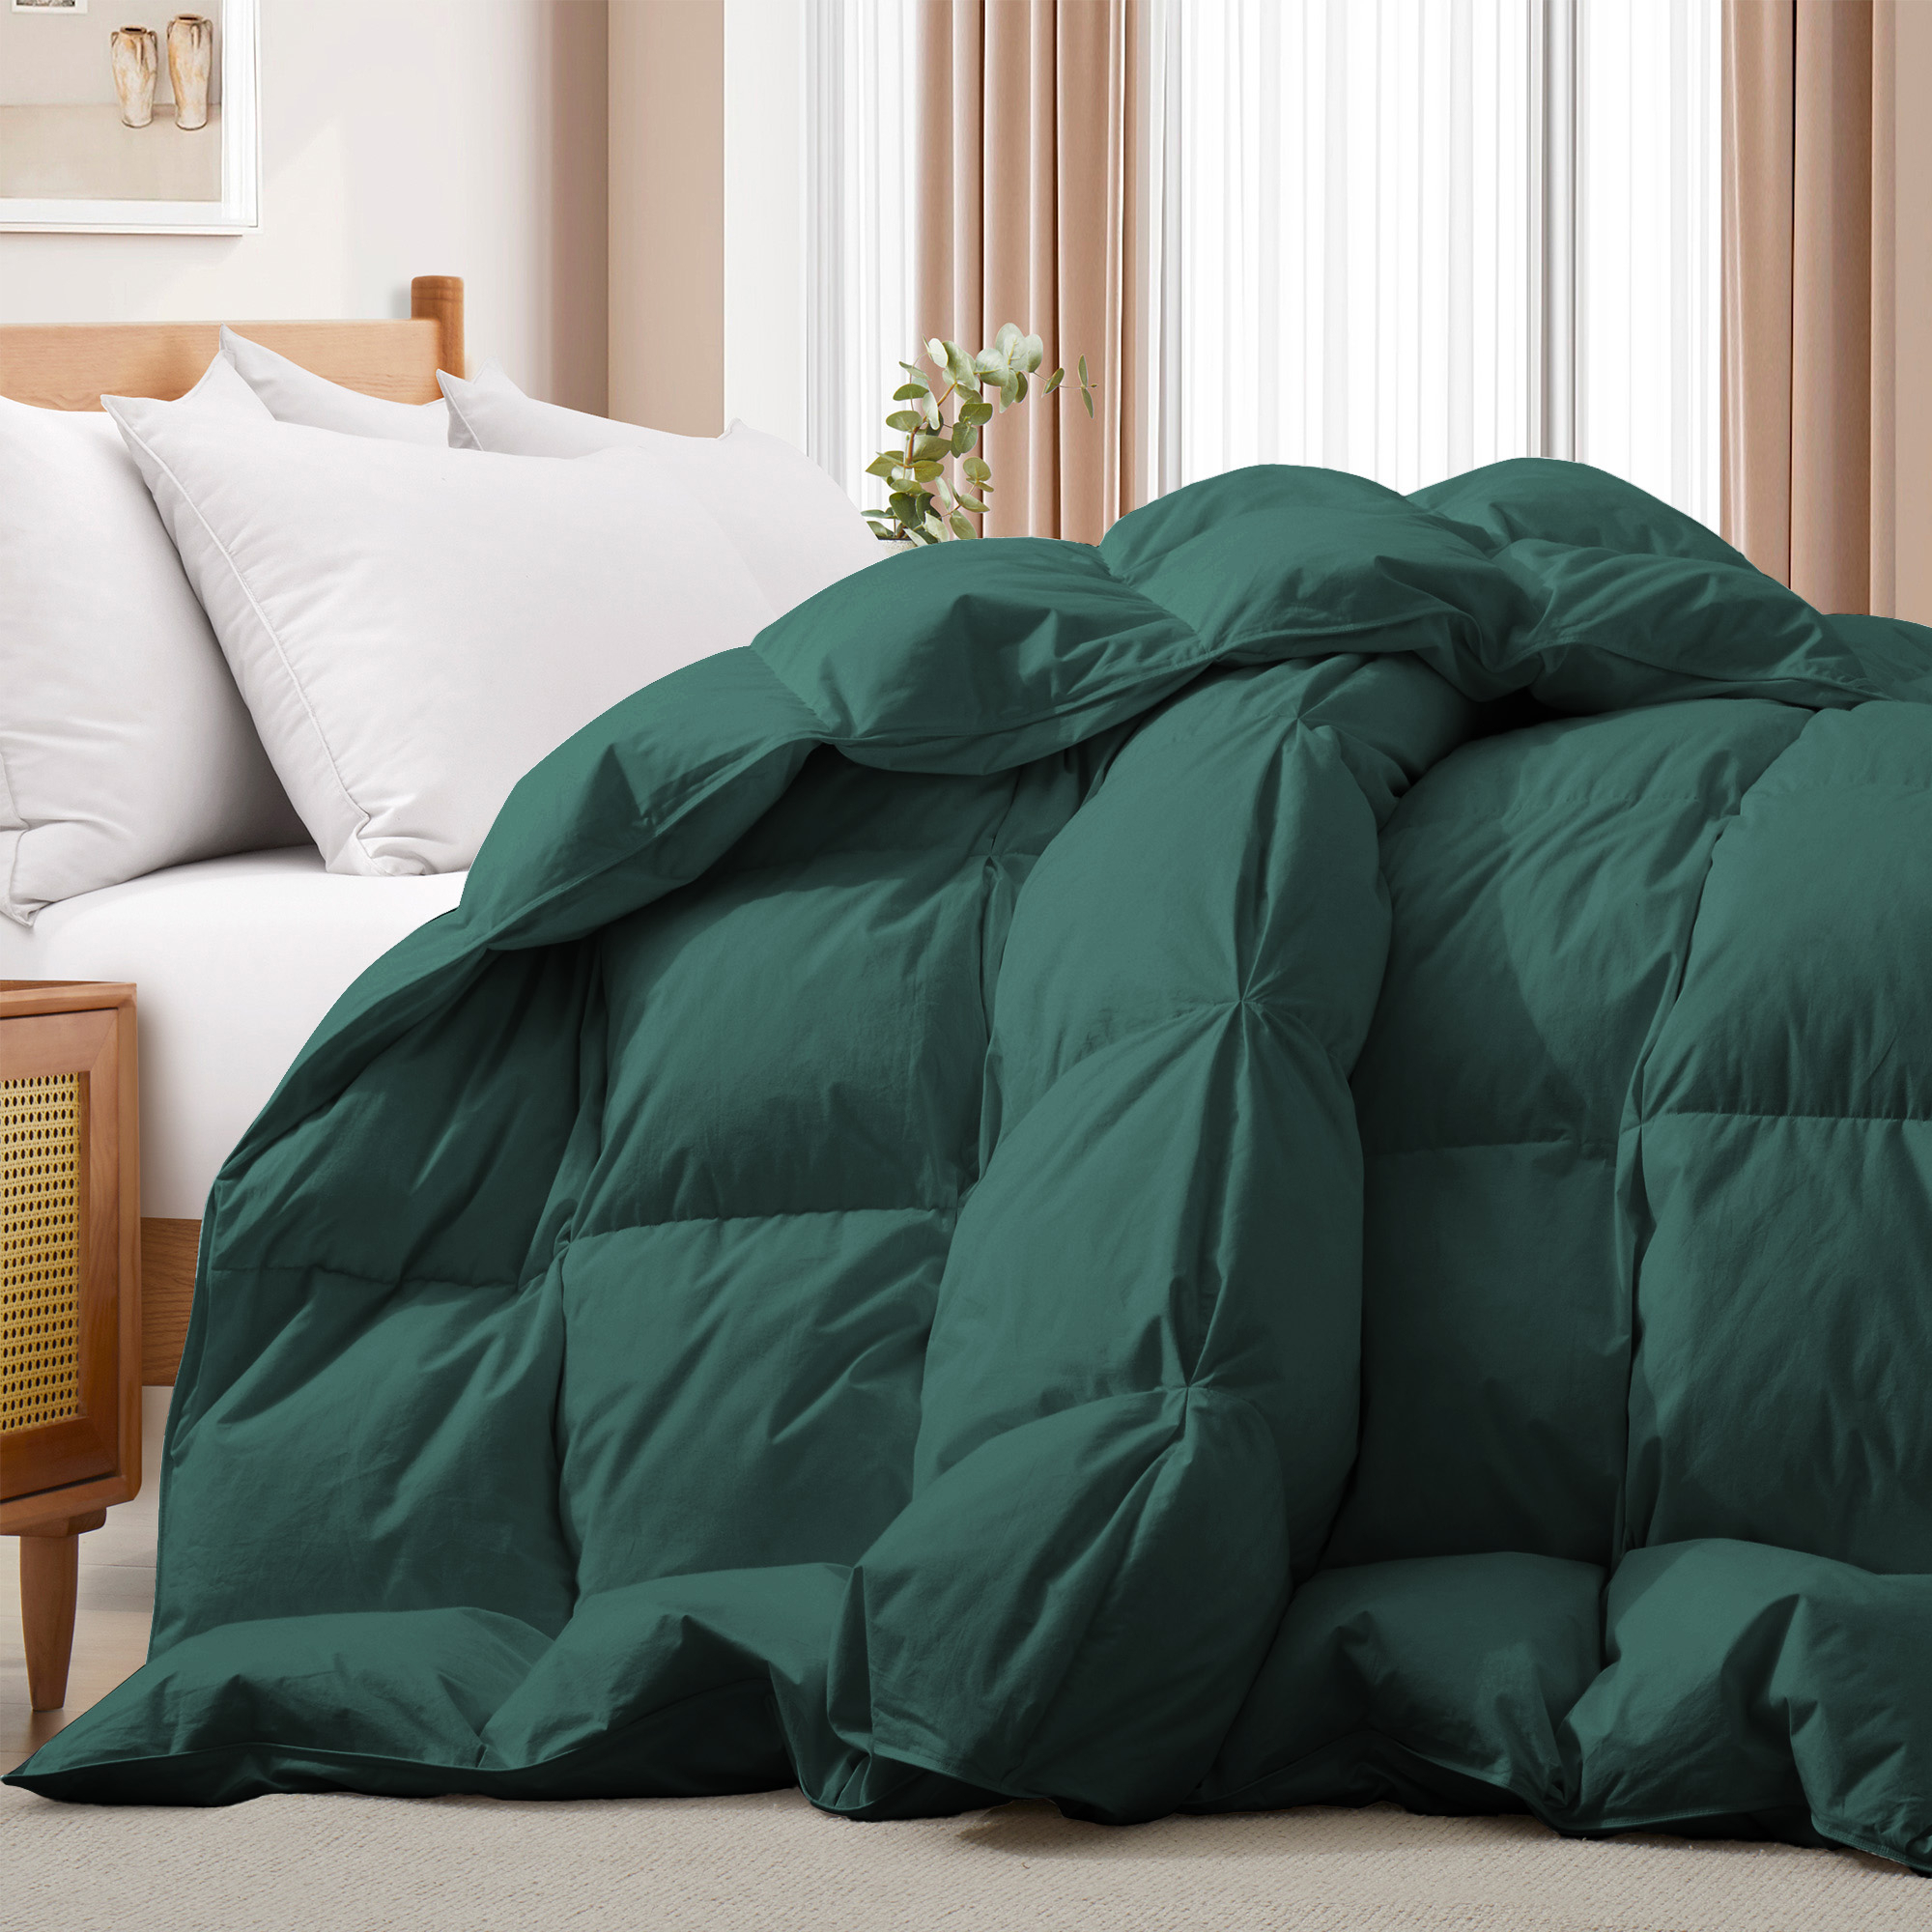 Premium Goose Feather And Down Duvet Insert -All Season Comforter With Breathable Cotton Cover - King-104*90